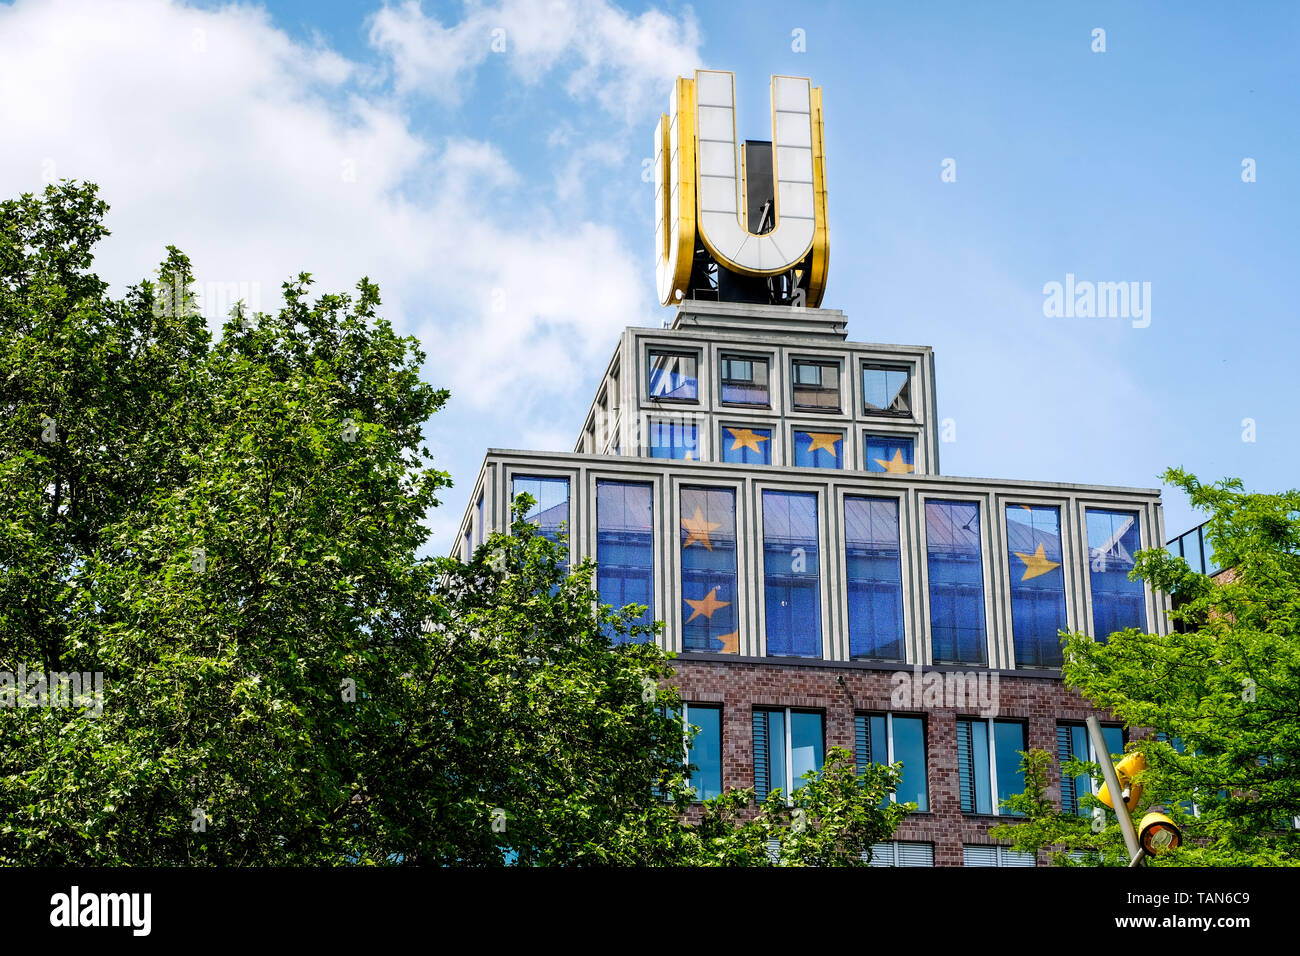 Video installation artwork of Adolf Winkelmann on top of the Dortmund U-tower, a building of the former Union Brauerei brewery, future arts and culture center. Dortmund, Germany Stock Photo